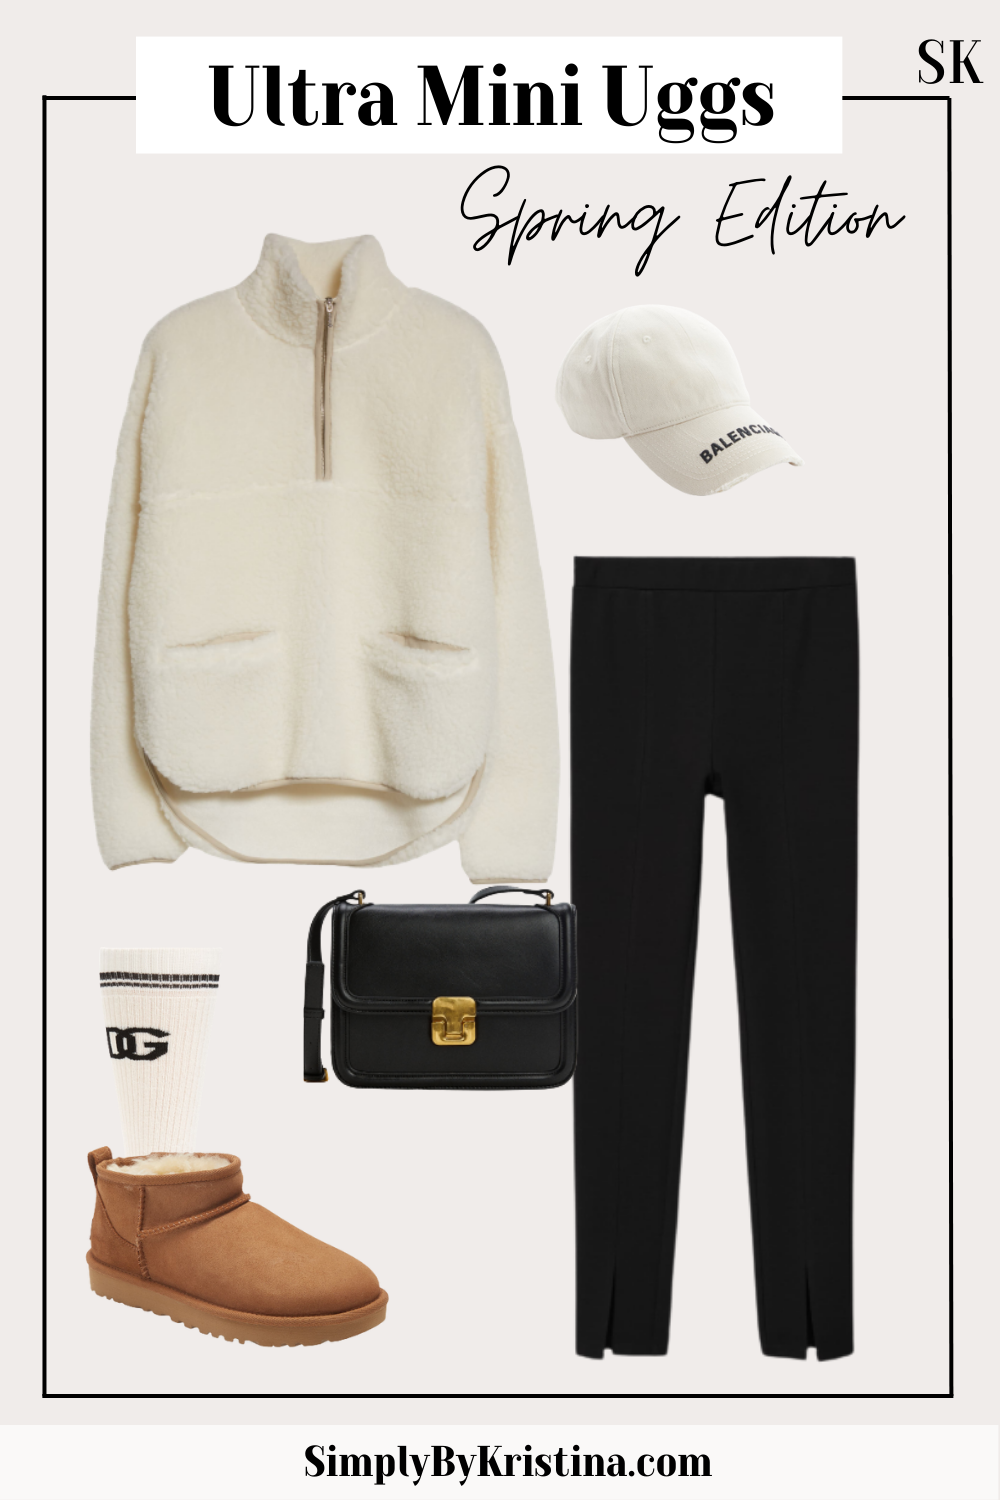 HOW TO STYLE ULTRA LOW MINI UGGS  6 autumn/winter outfit ideas